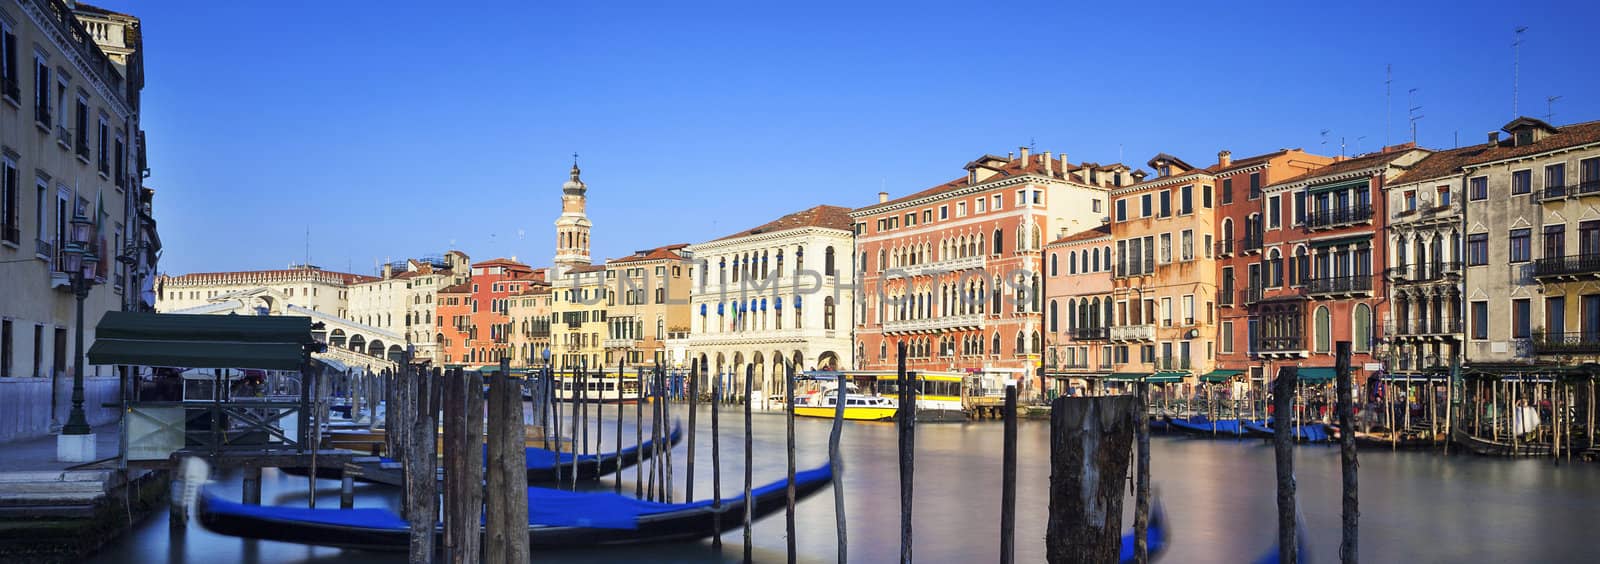 Panoramic view of Grand Canal, Venice